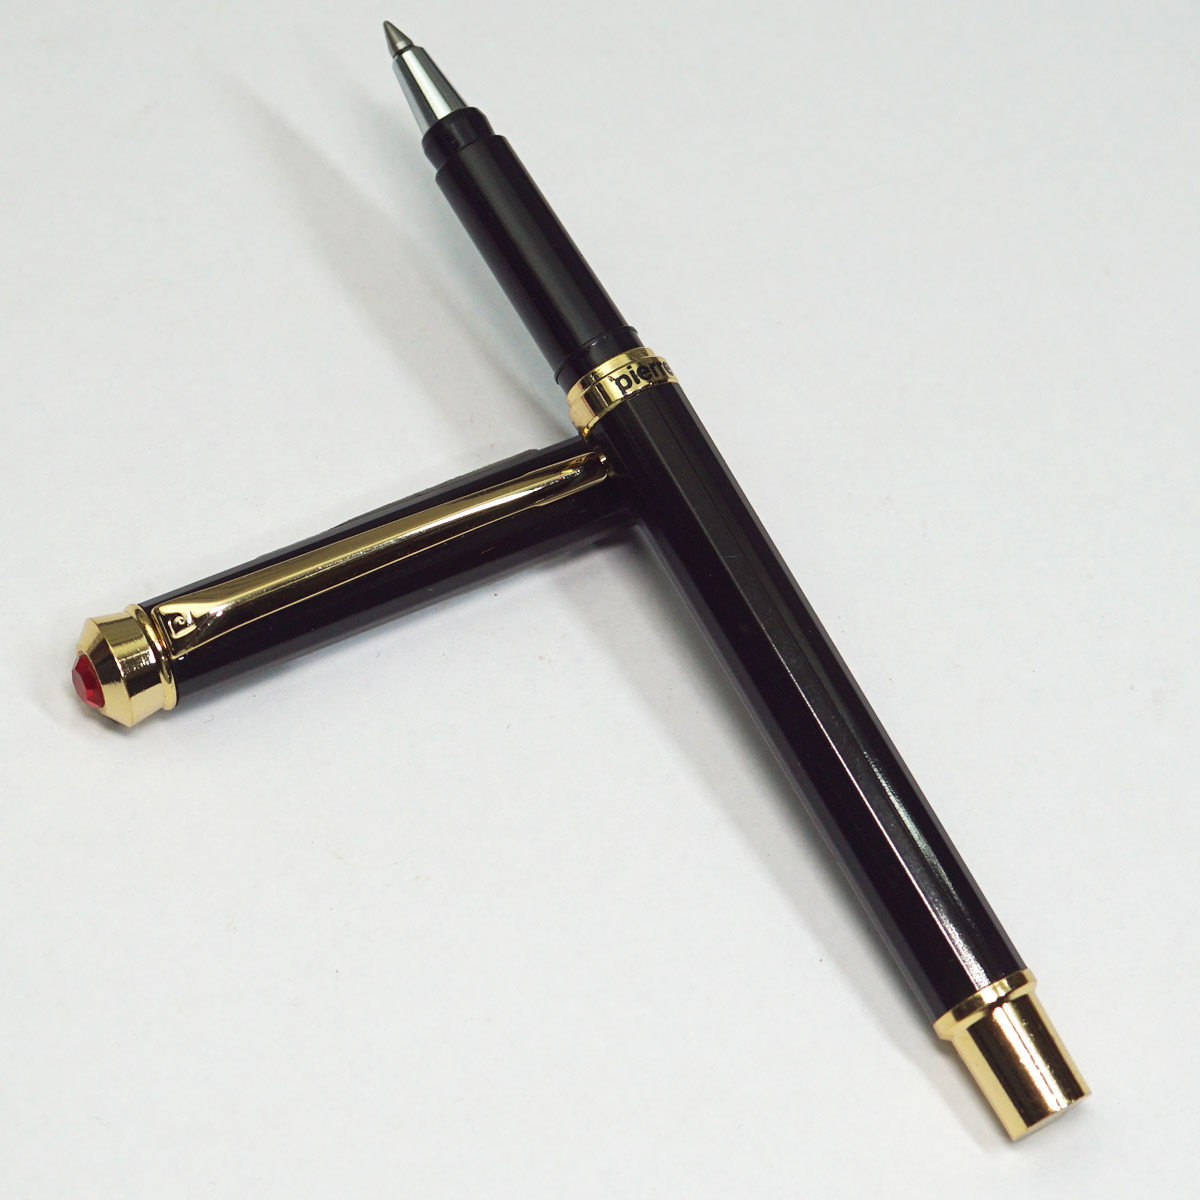 Pierre Cardin Jewel Black Color Body With Golden Color Clip And Top On Red Stone On Cap Medium Tip Roller Ball Pen SKU 23527